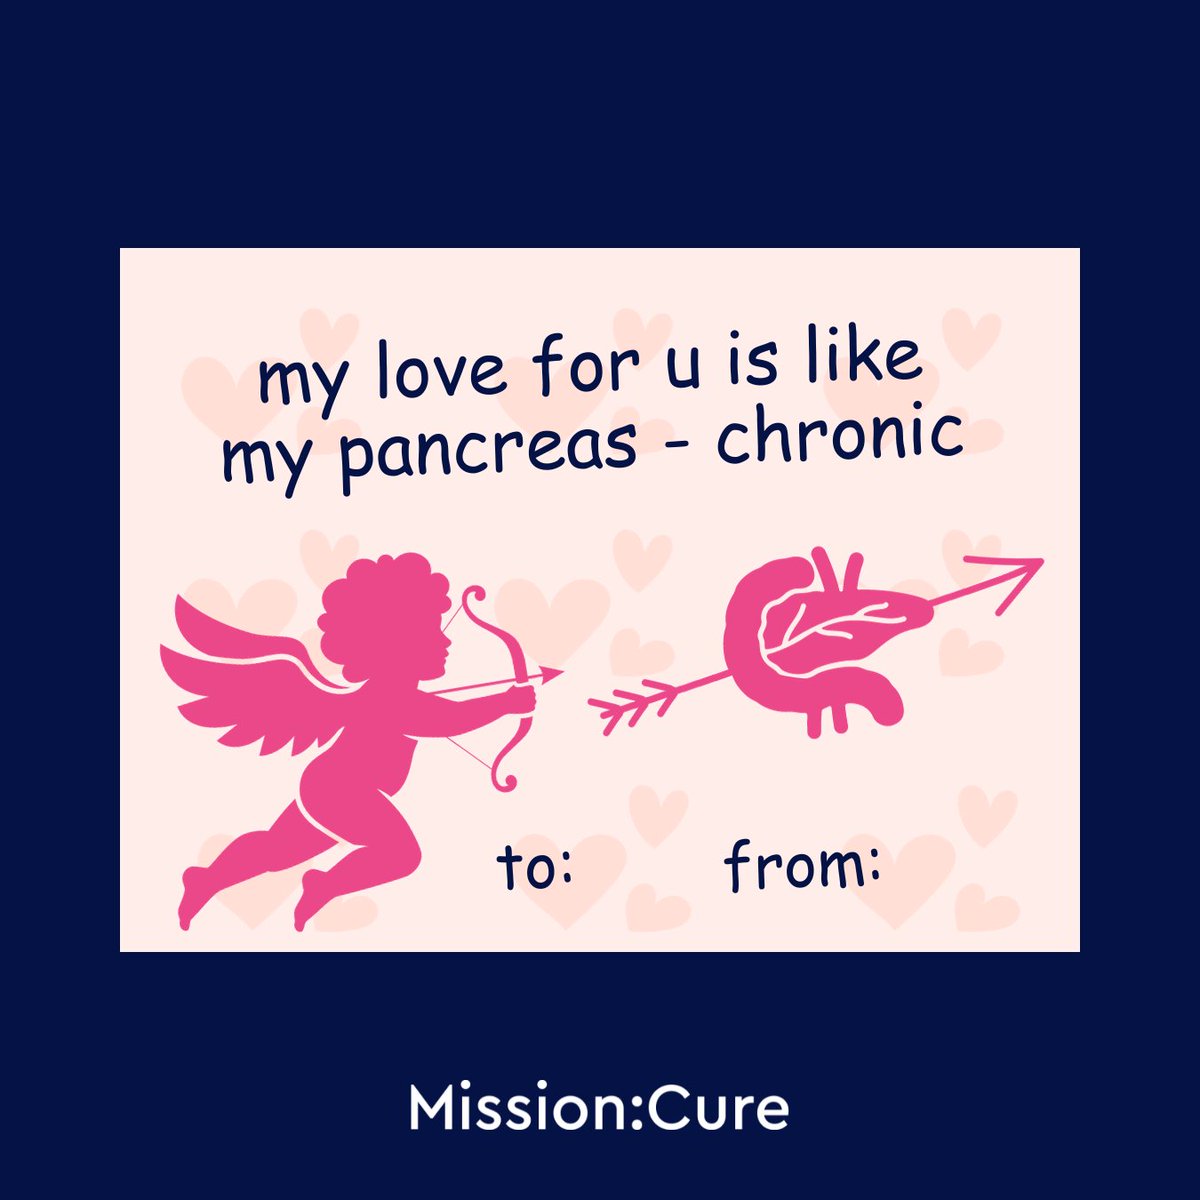 Adding a pinch of pancreatitis humor to your Valentine's Day! 💌💞 Which card speaks to your #CrankyPanky connection? #ValentinesDay #Pancreatitis